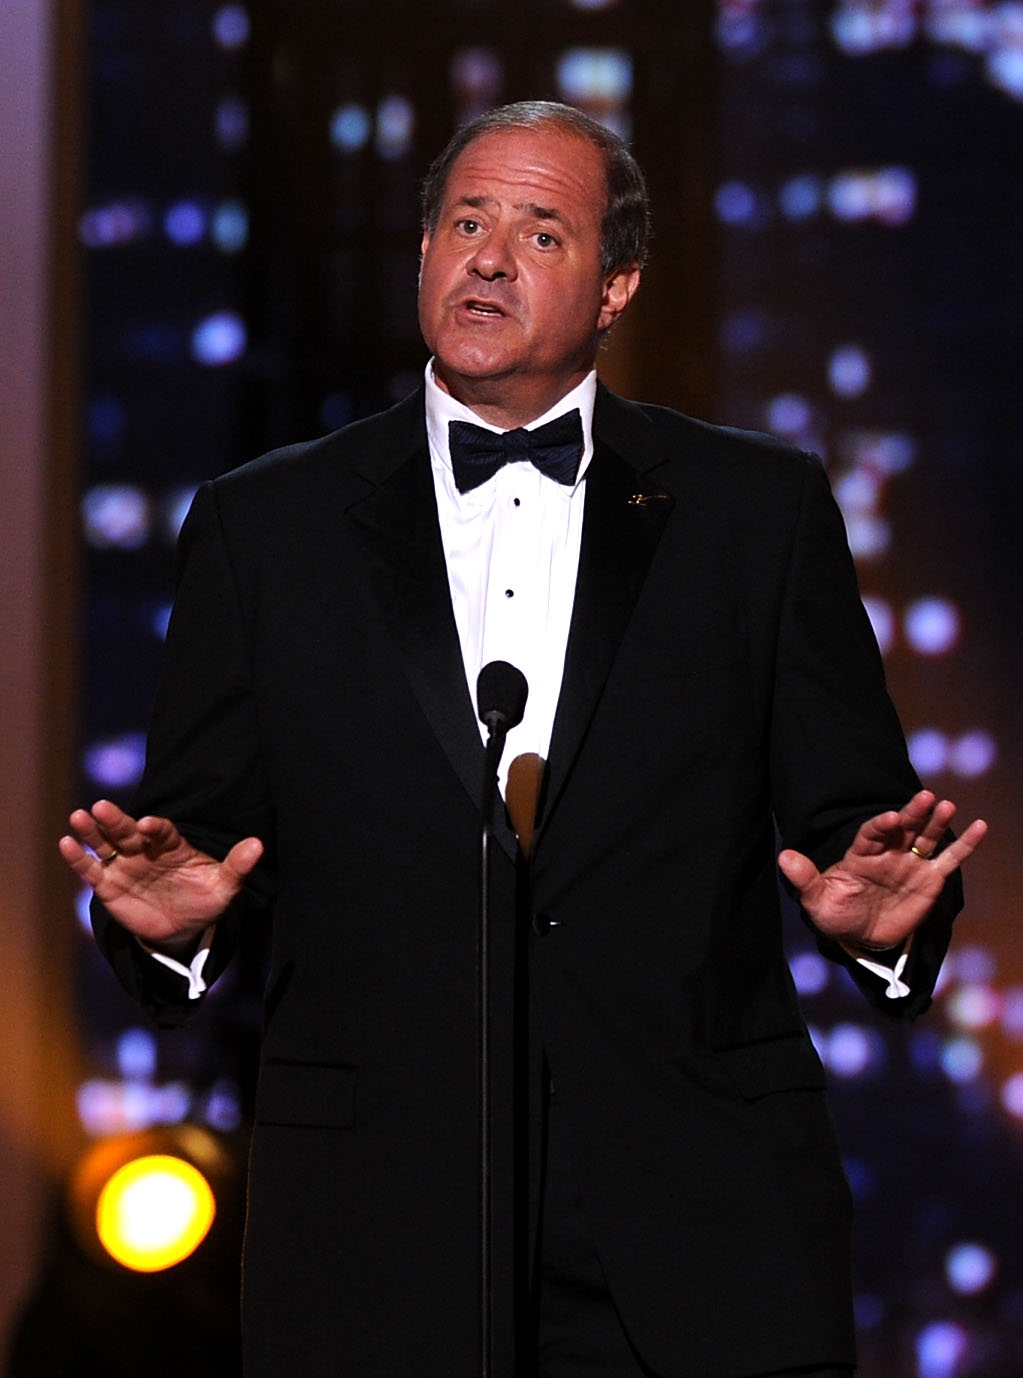 LOS ANGELES, CA - JULY 14:  ESPN personality Chris Berman speaks onstage during the 2010 ESPY Awards at Nokia Theatre L.A. Live on July 14, 2010 in Los Angeles, California.  (Photo by Kevin Winter/Getty Images)